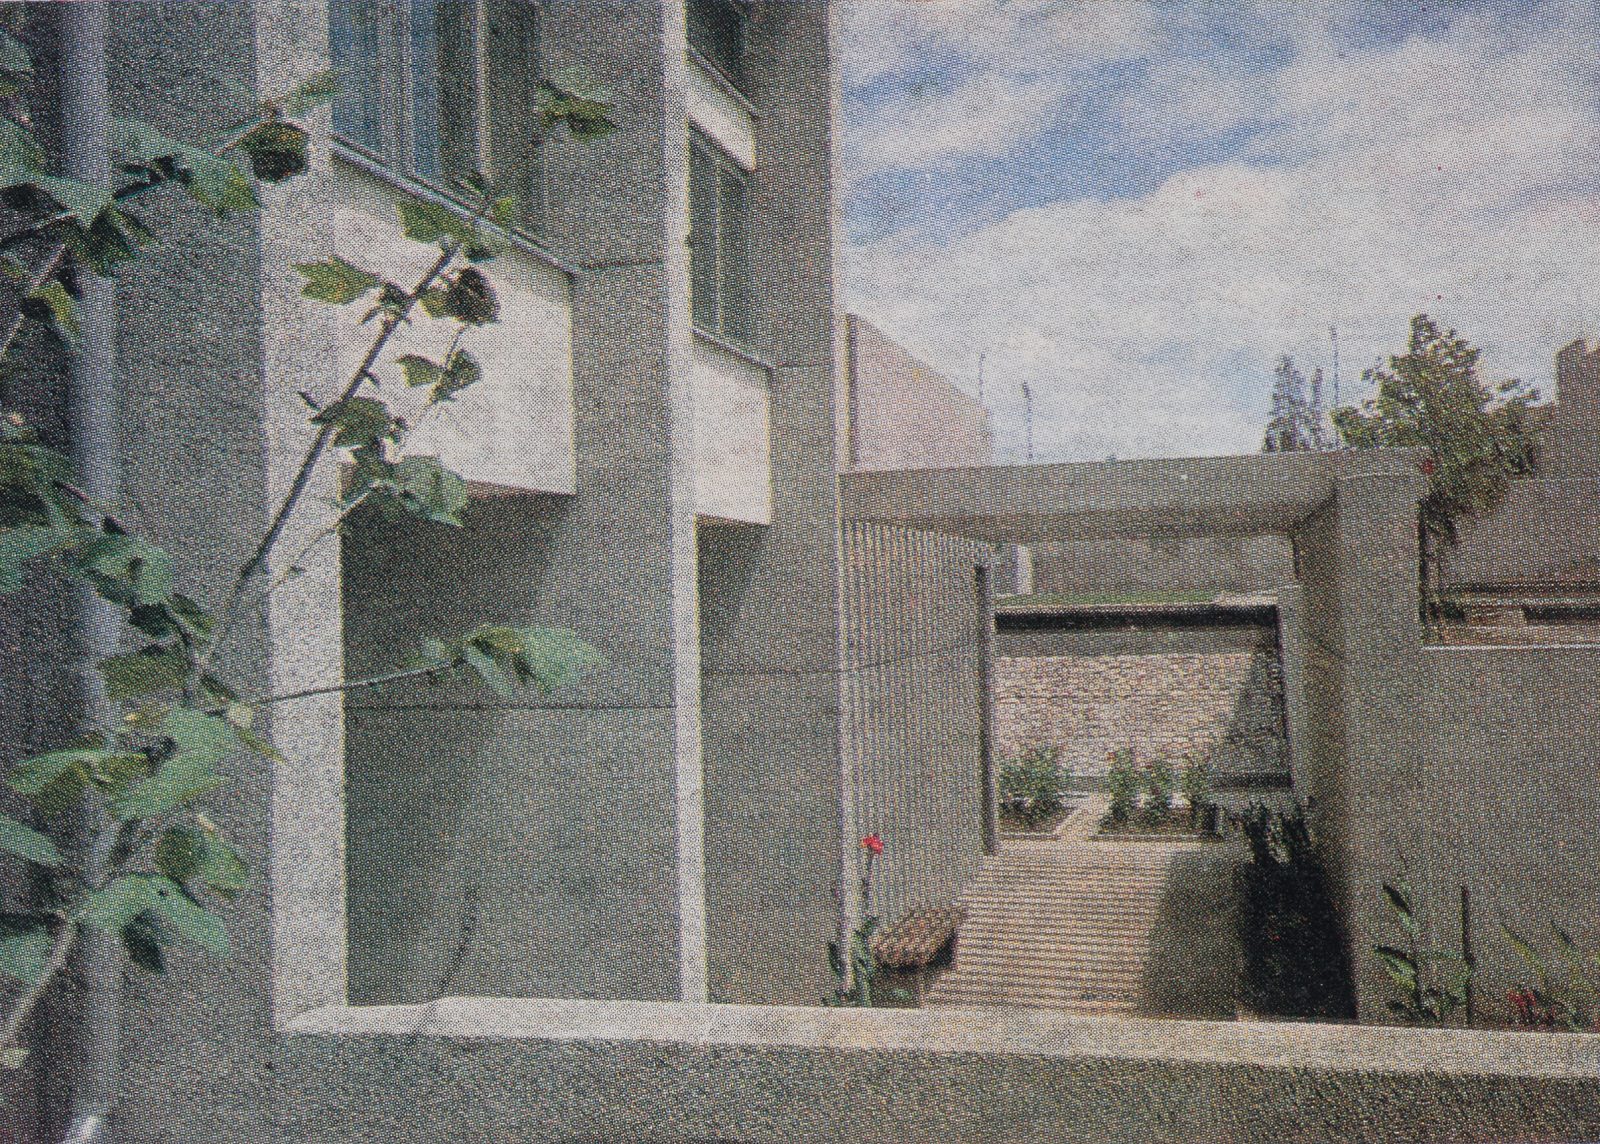 Overview of the embassy premises, garden and living quarters as seen from the reception halls, photo Michał Gutt. Architektura 1971, no. 8, p. 315, 316 and 317 Association of Polish Architects (SARP) Library